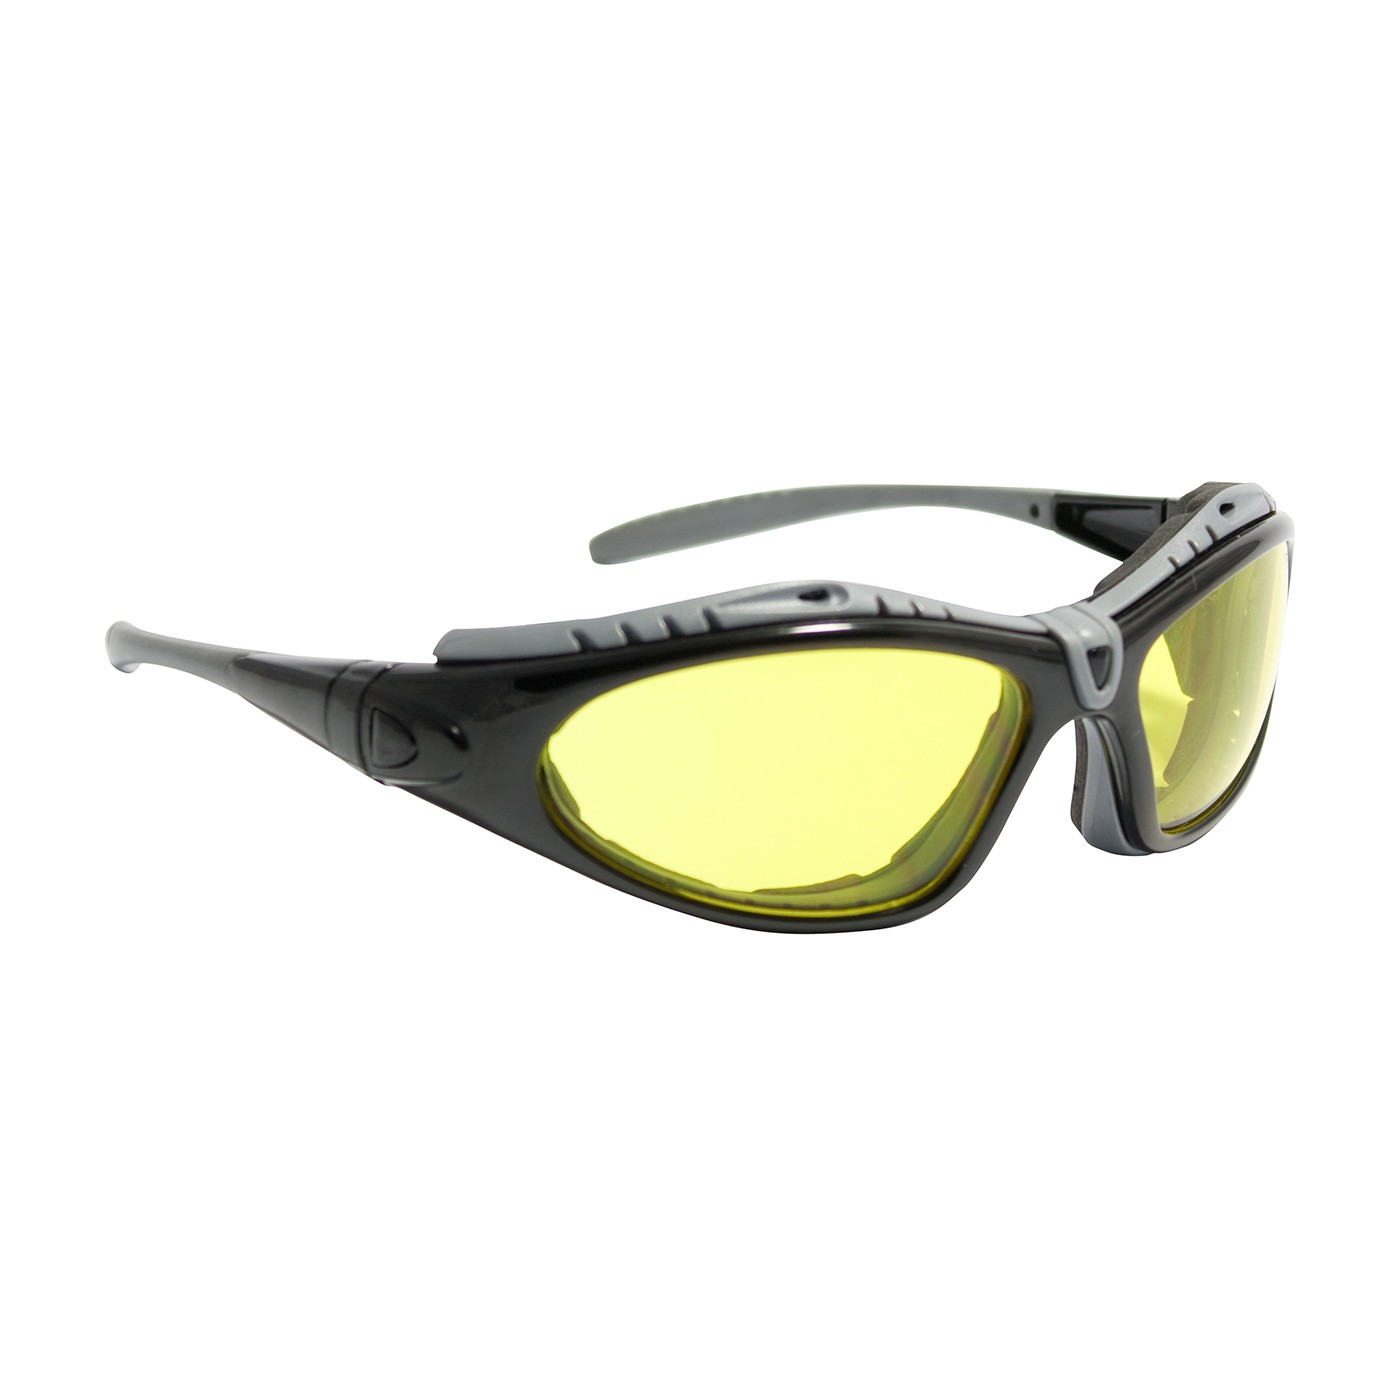 Fuselage™ Full Frame Safety Glasses with Black Frame, Foam Padding, Amber Lens and Anti-Scratch / Anti-Fog Coating  (#250-50-0429)